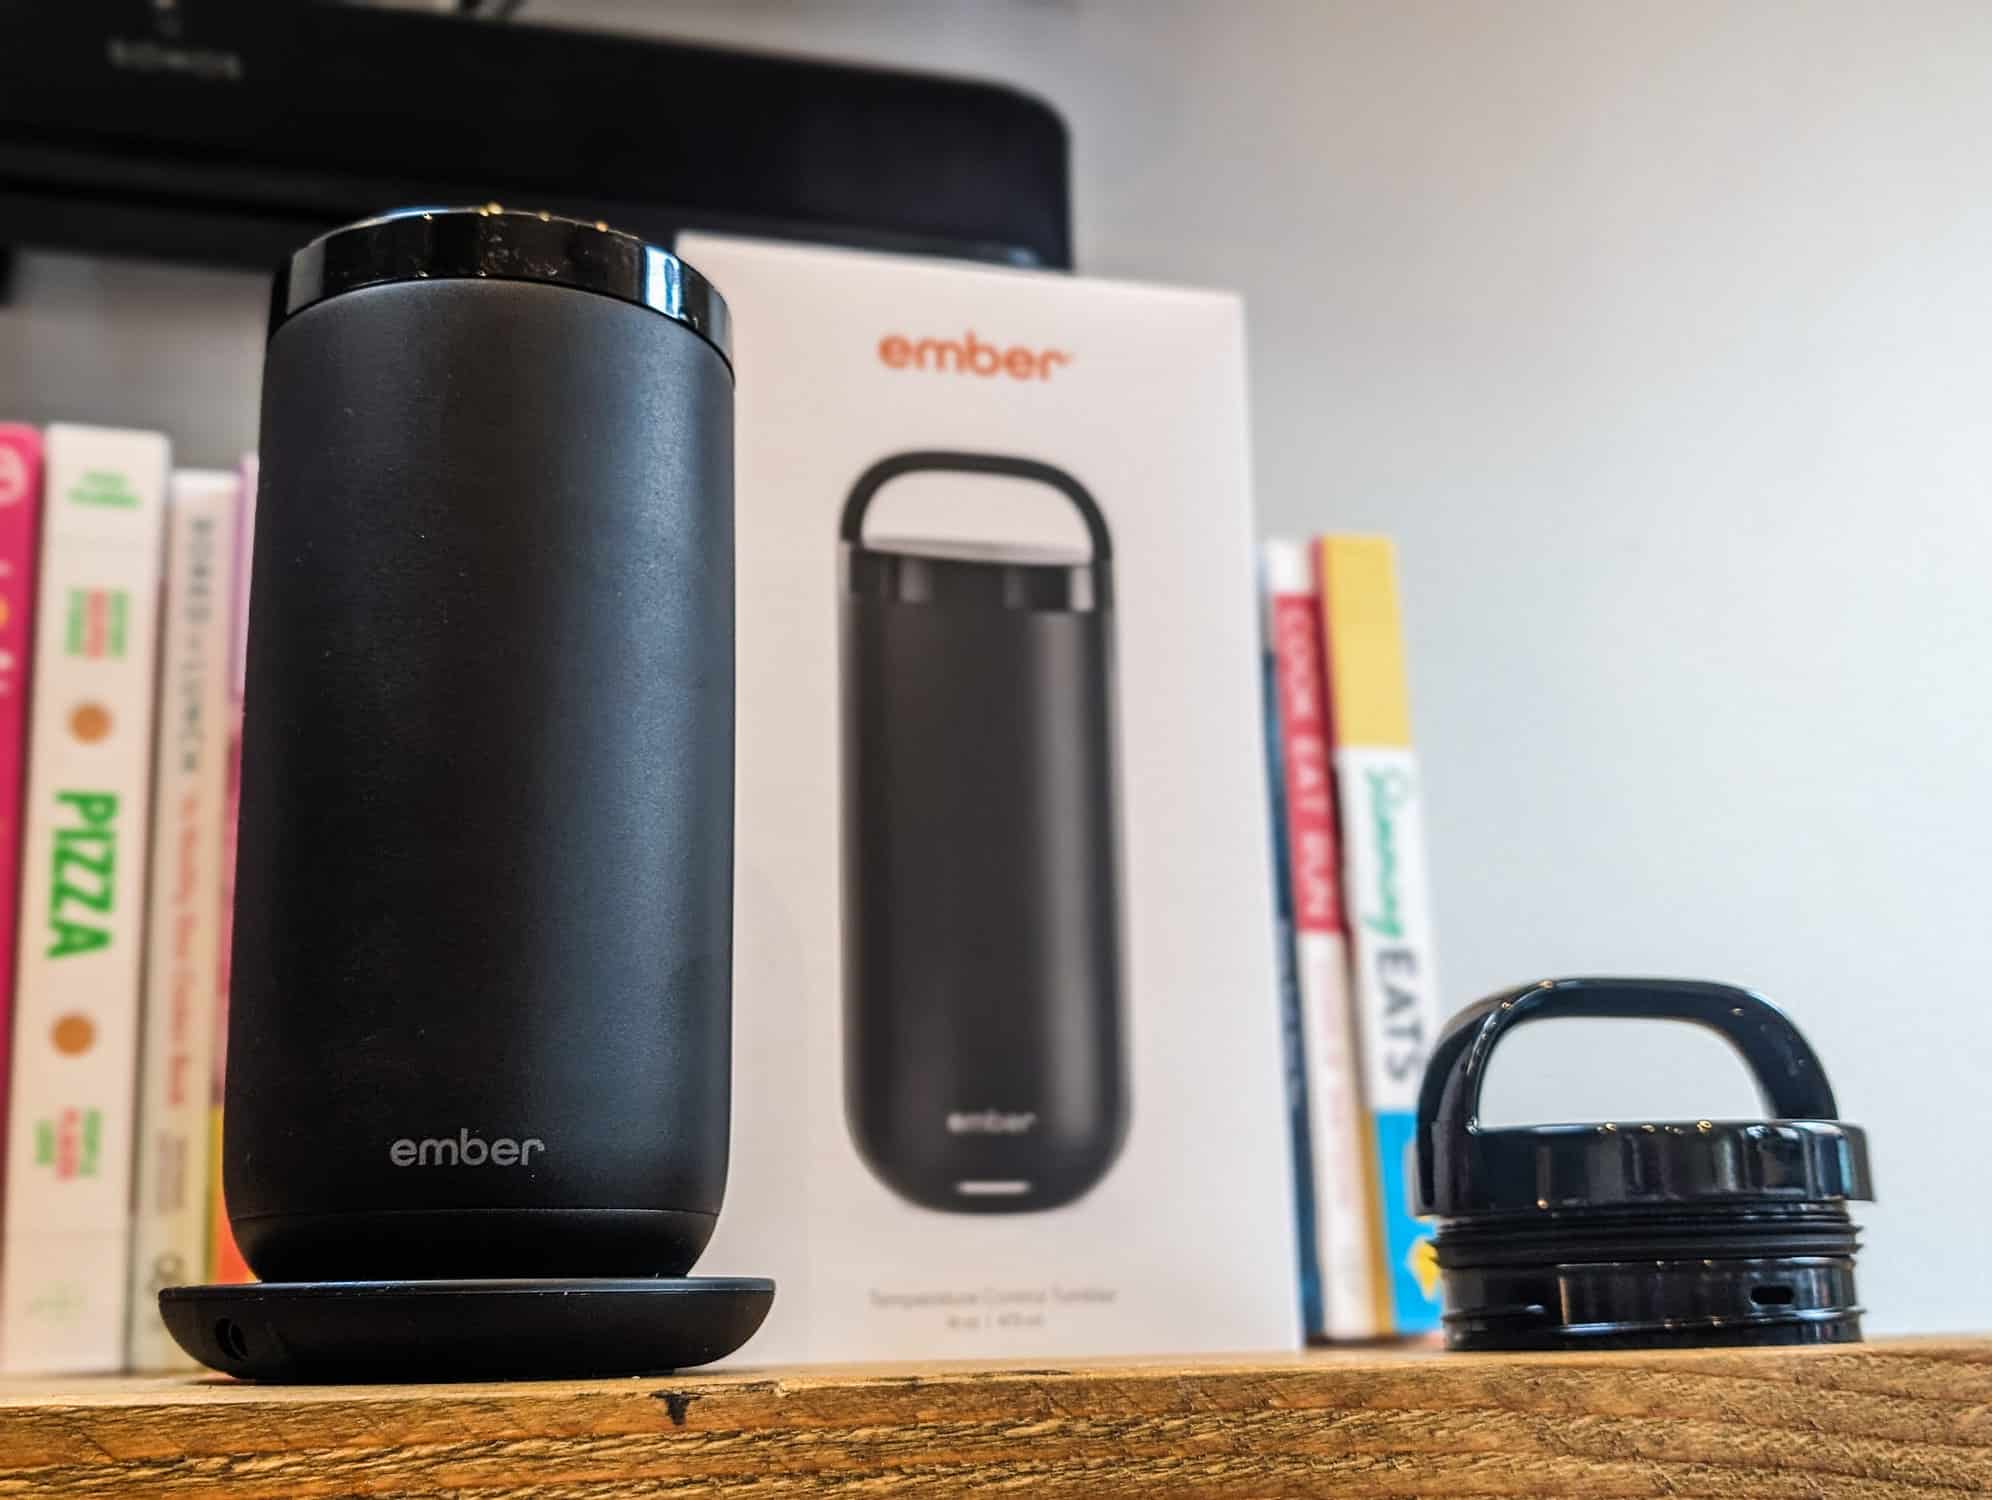 Ember Tumbler Review – An insanely expensive but amazing heated smart coffee travel cup